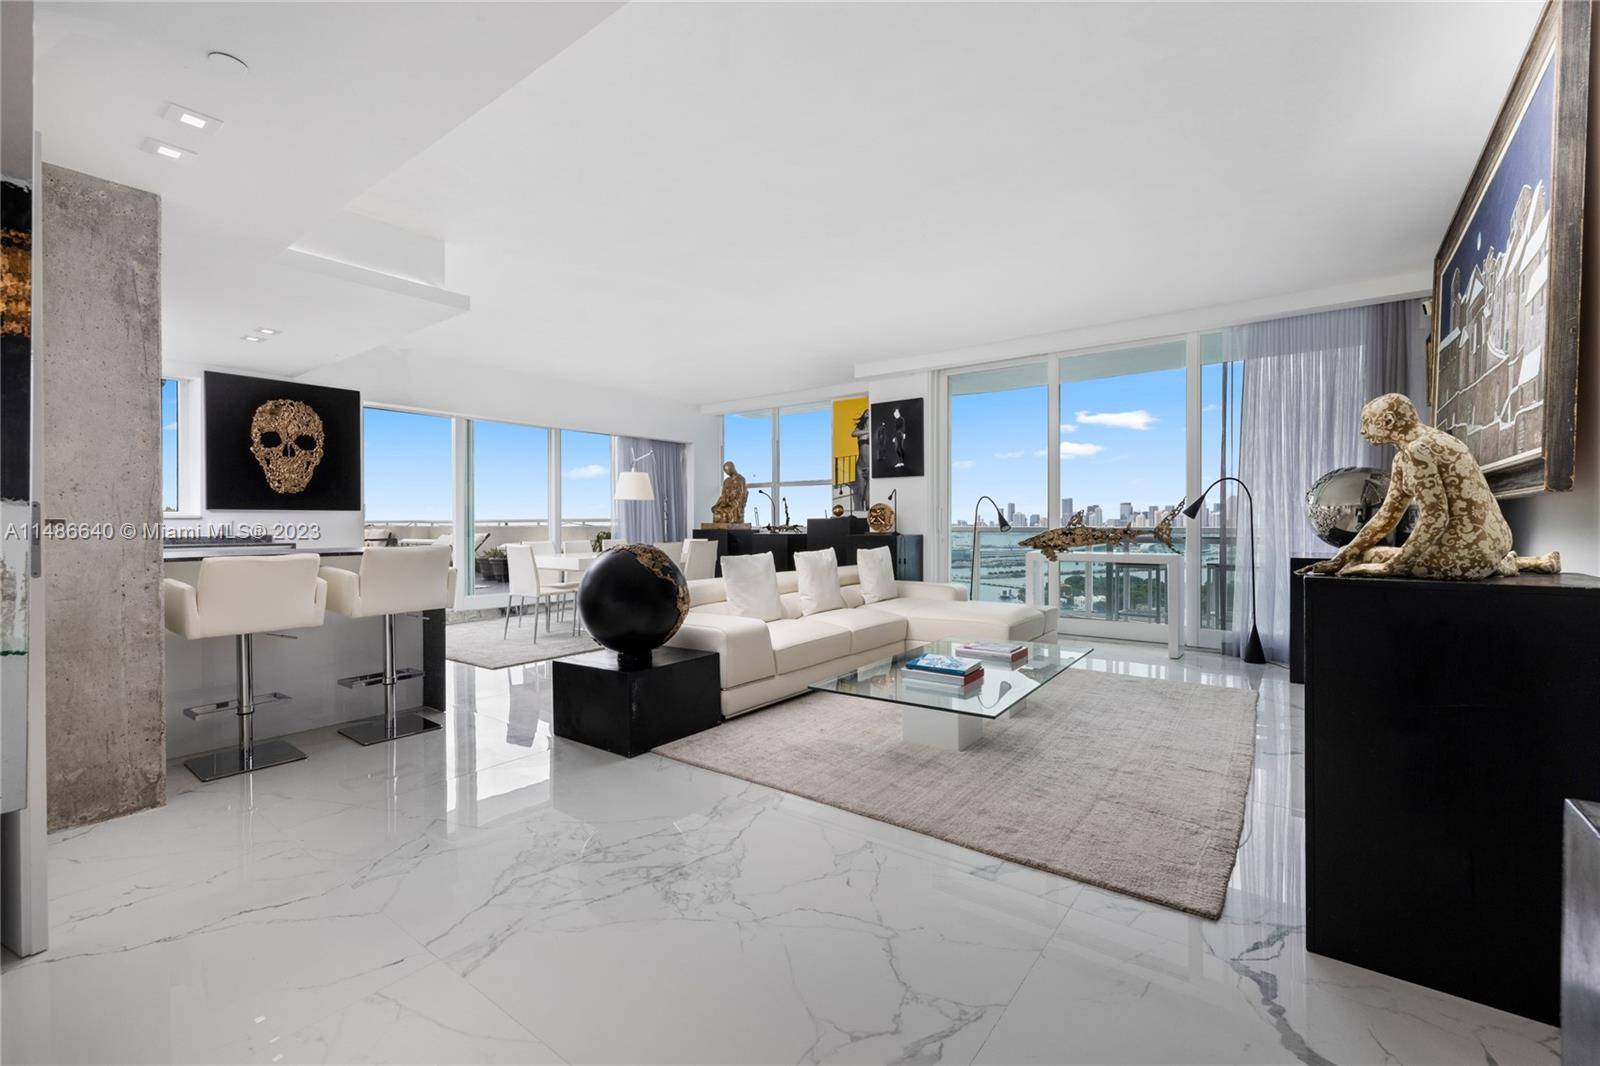 Unique opportunity of a rarely available spectacular penthouse at the Floridian South Beach.